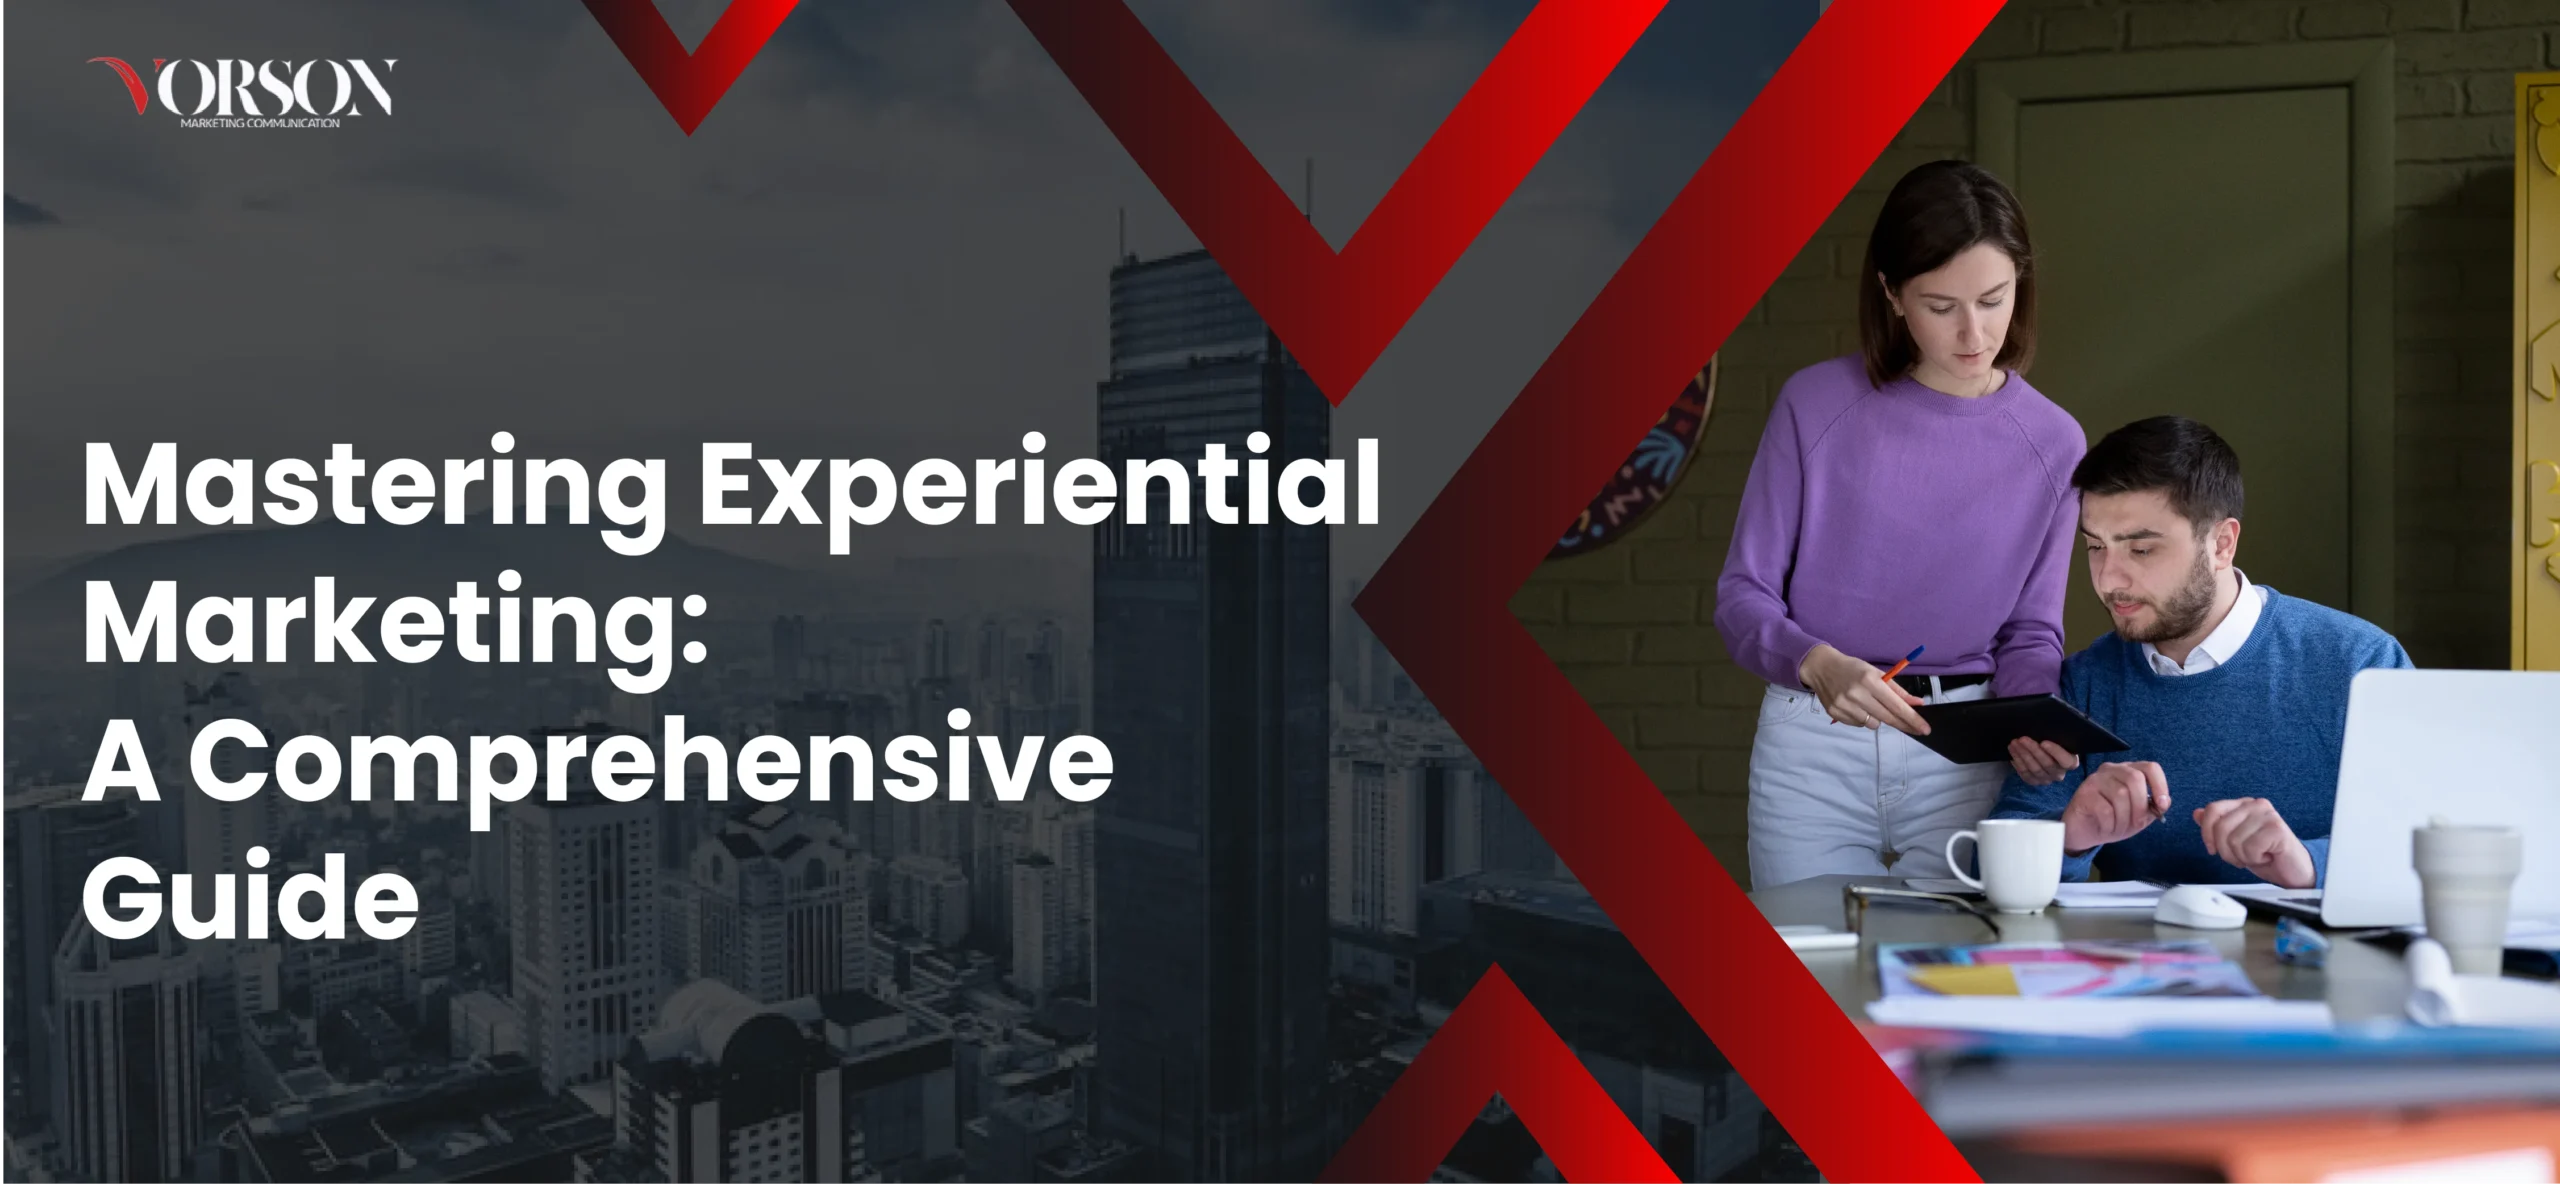 Mastering Experiential Marketing: A Comprehensive Guide